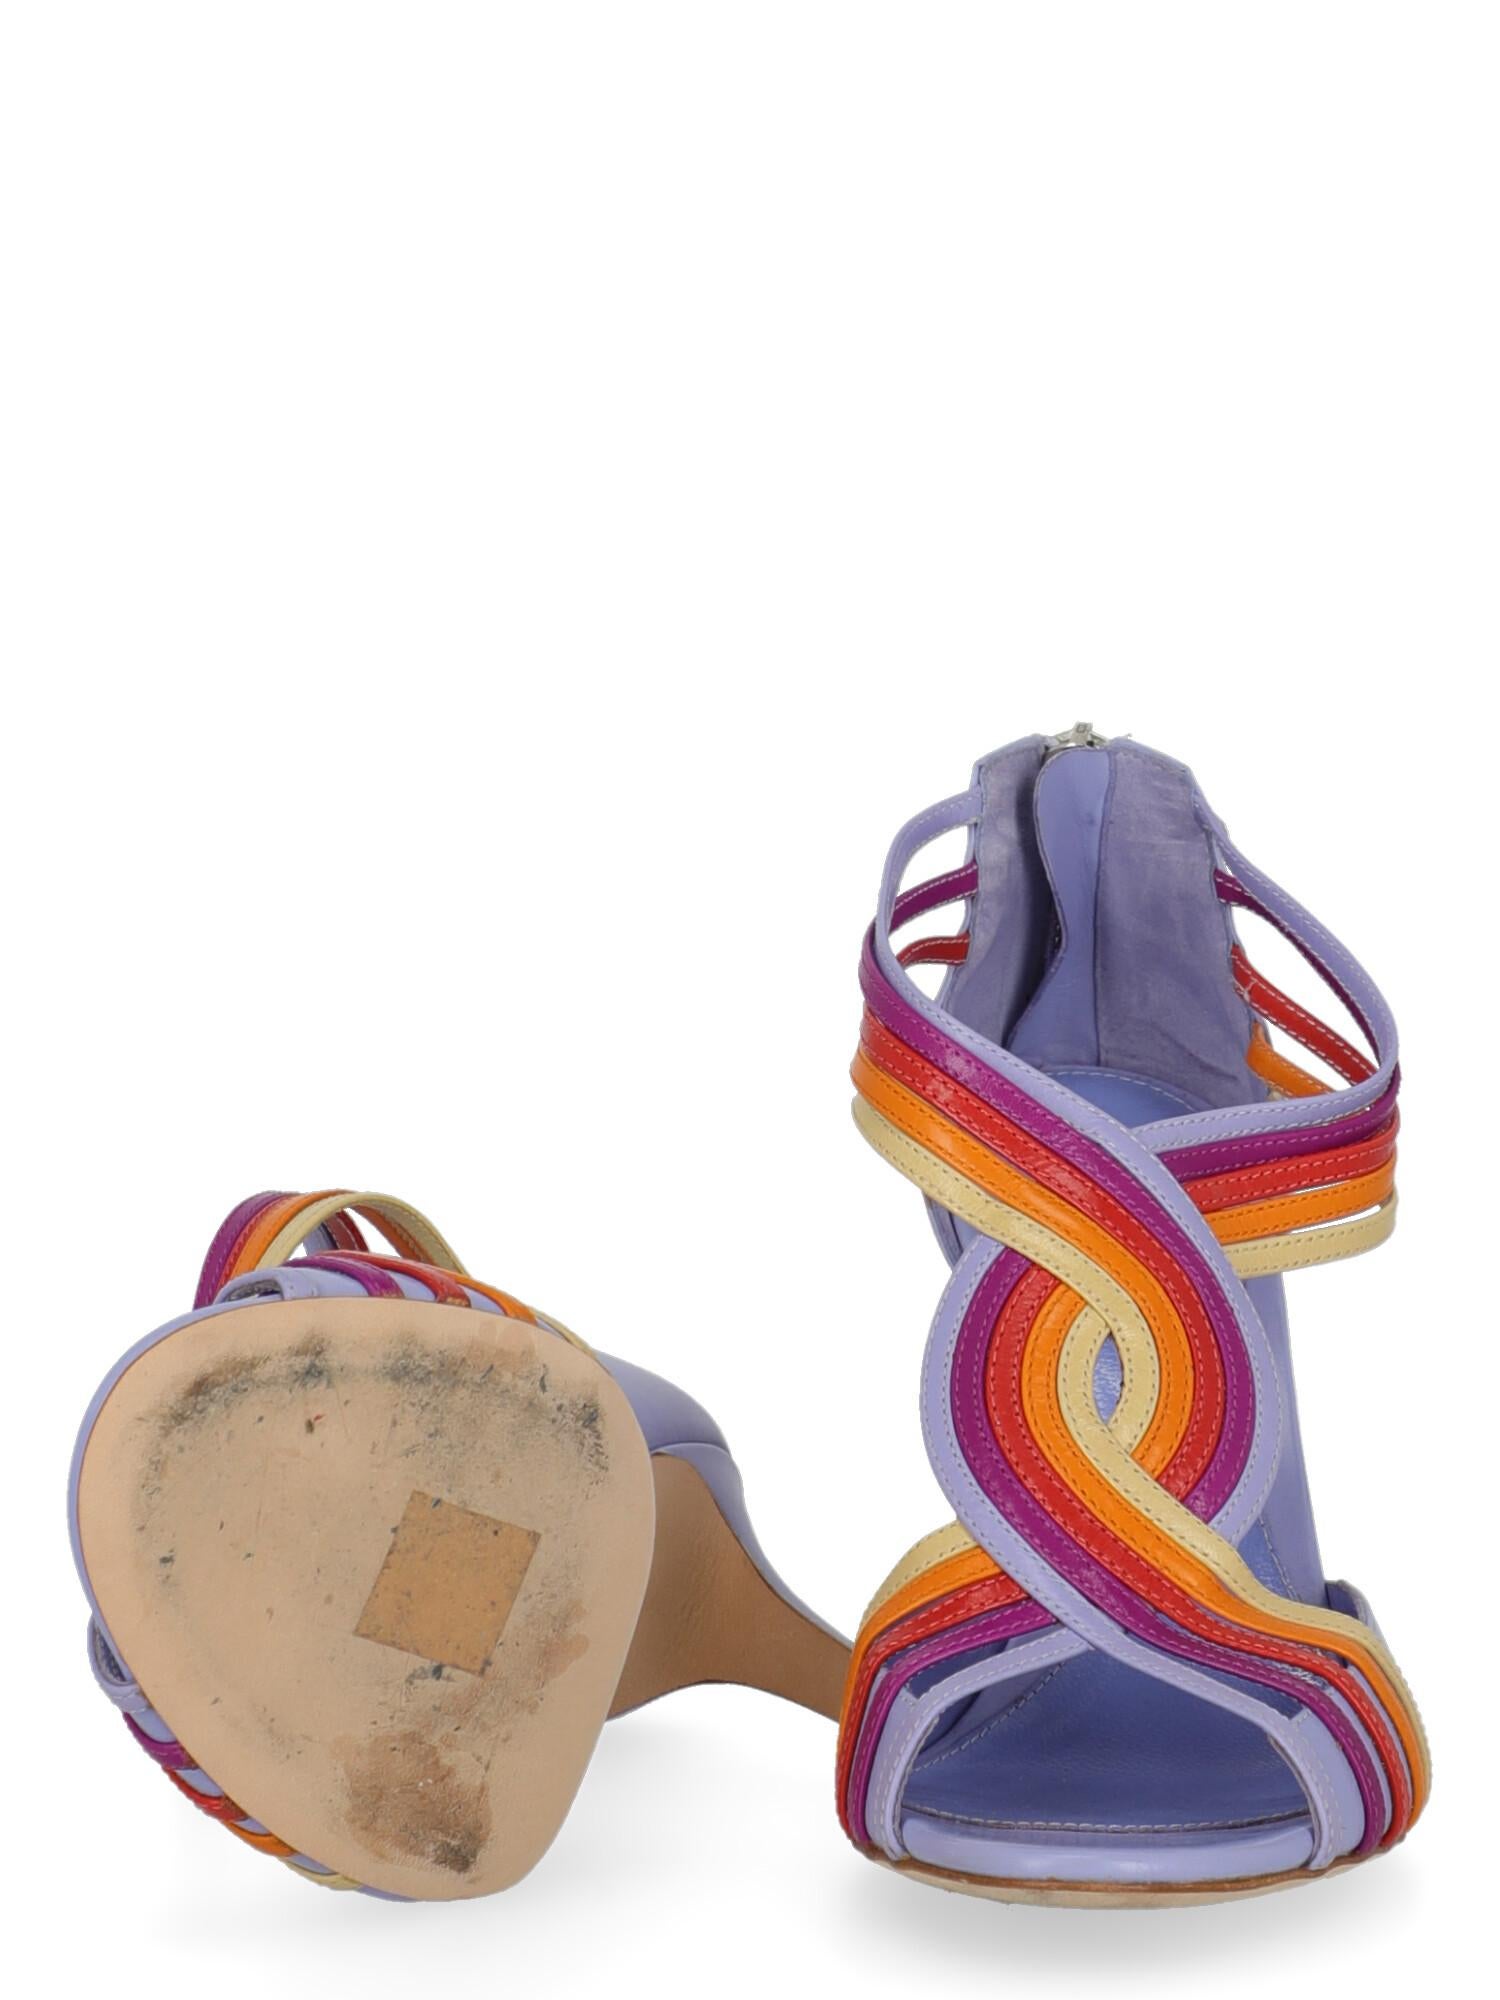 Sergio Rossi  Women   Sandals  Purple, Red, Yellow Leather EU 38 In Good Condition For Sale In Milan, IT